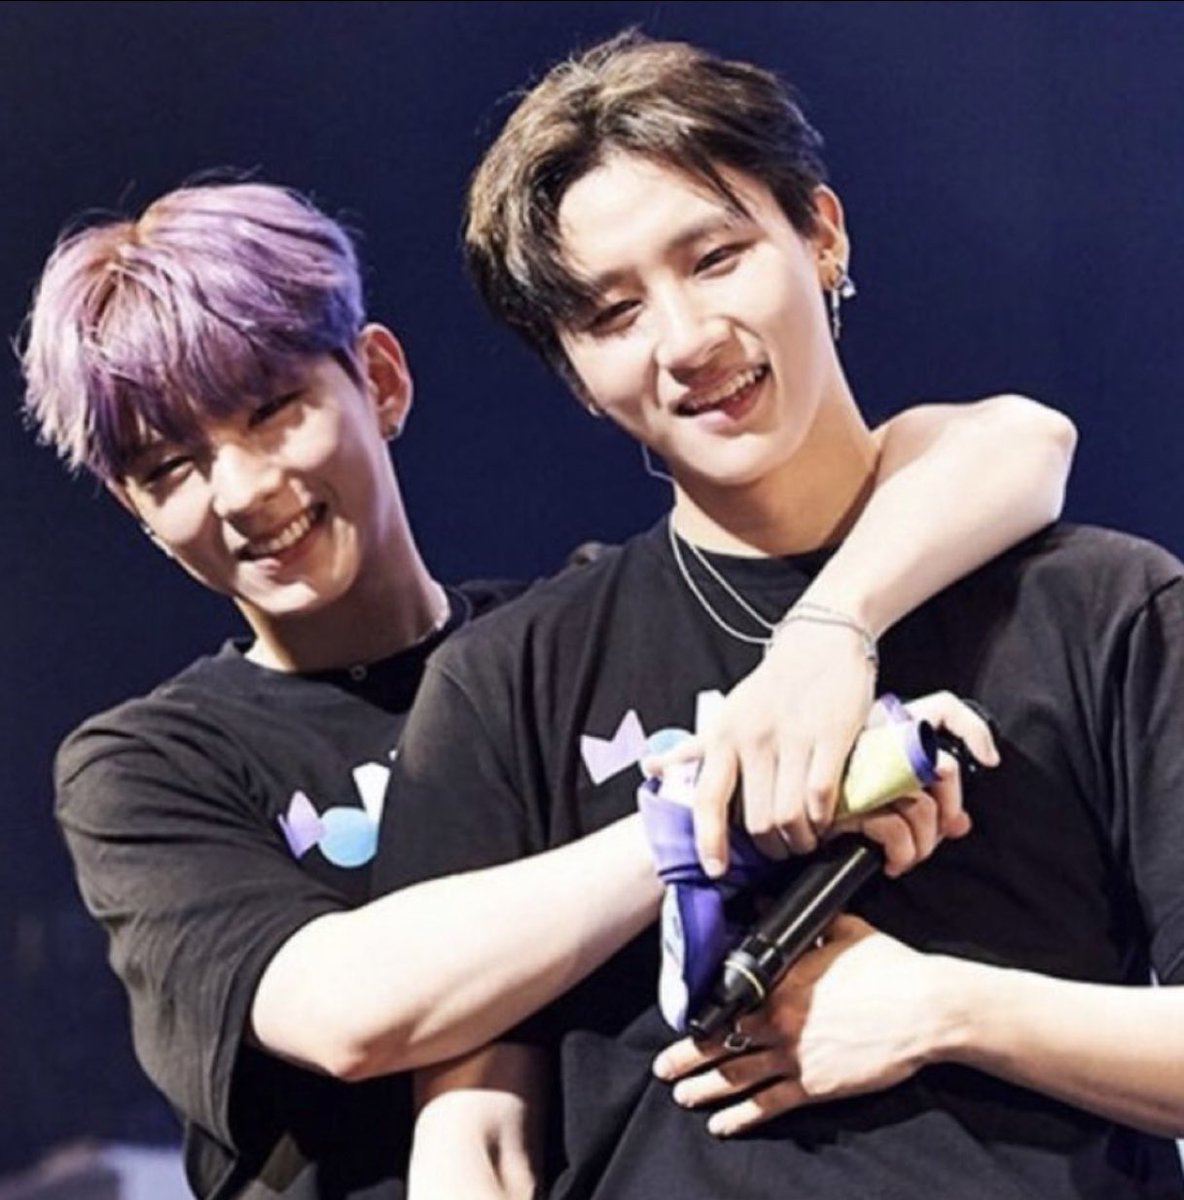 changki- crumbs crumbs crumbs - they act awkward around eachother be everyone knows they have so much love for eachother - ‘your the maknae but it seemed like you become a leader because of the tour’